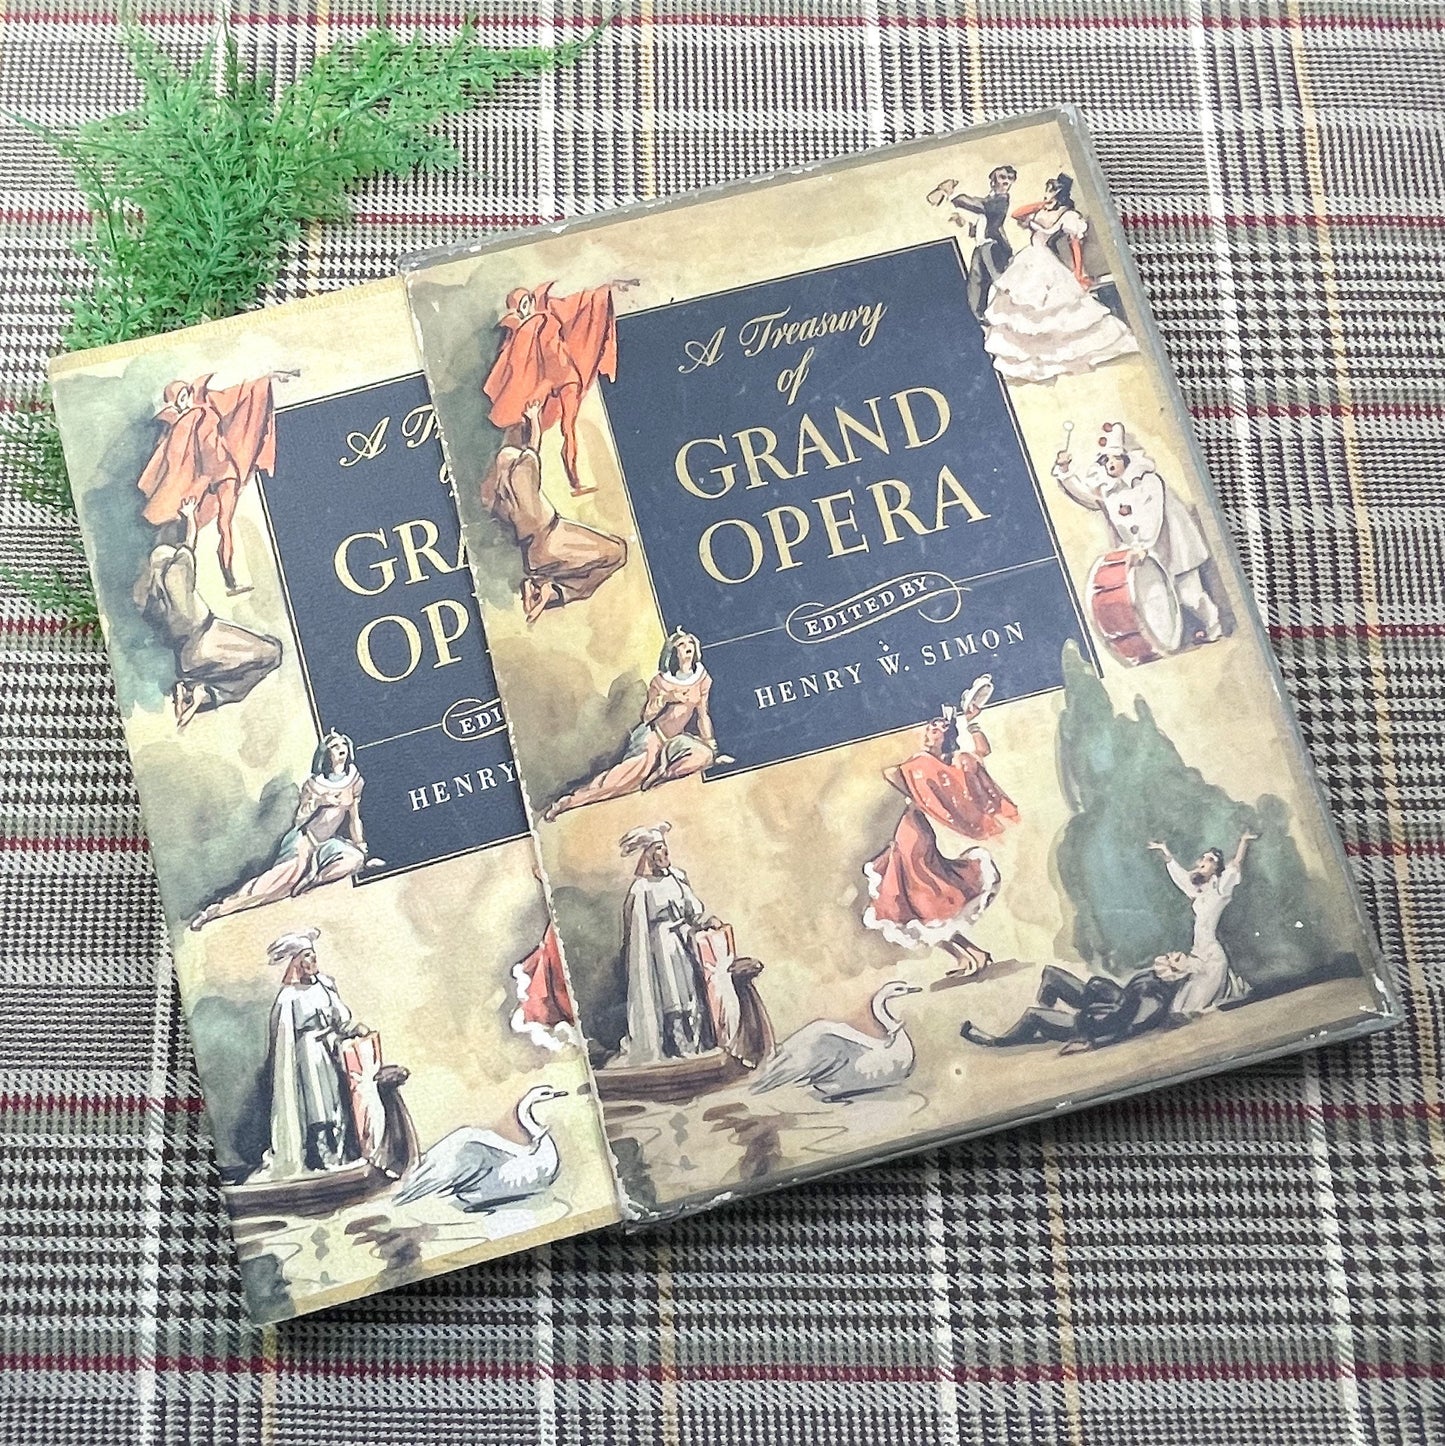 Vintage Music, A Tresury of Grand Opera, 1946 in protective box